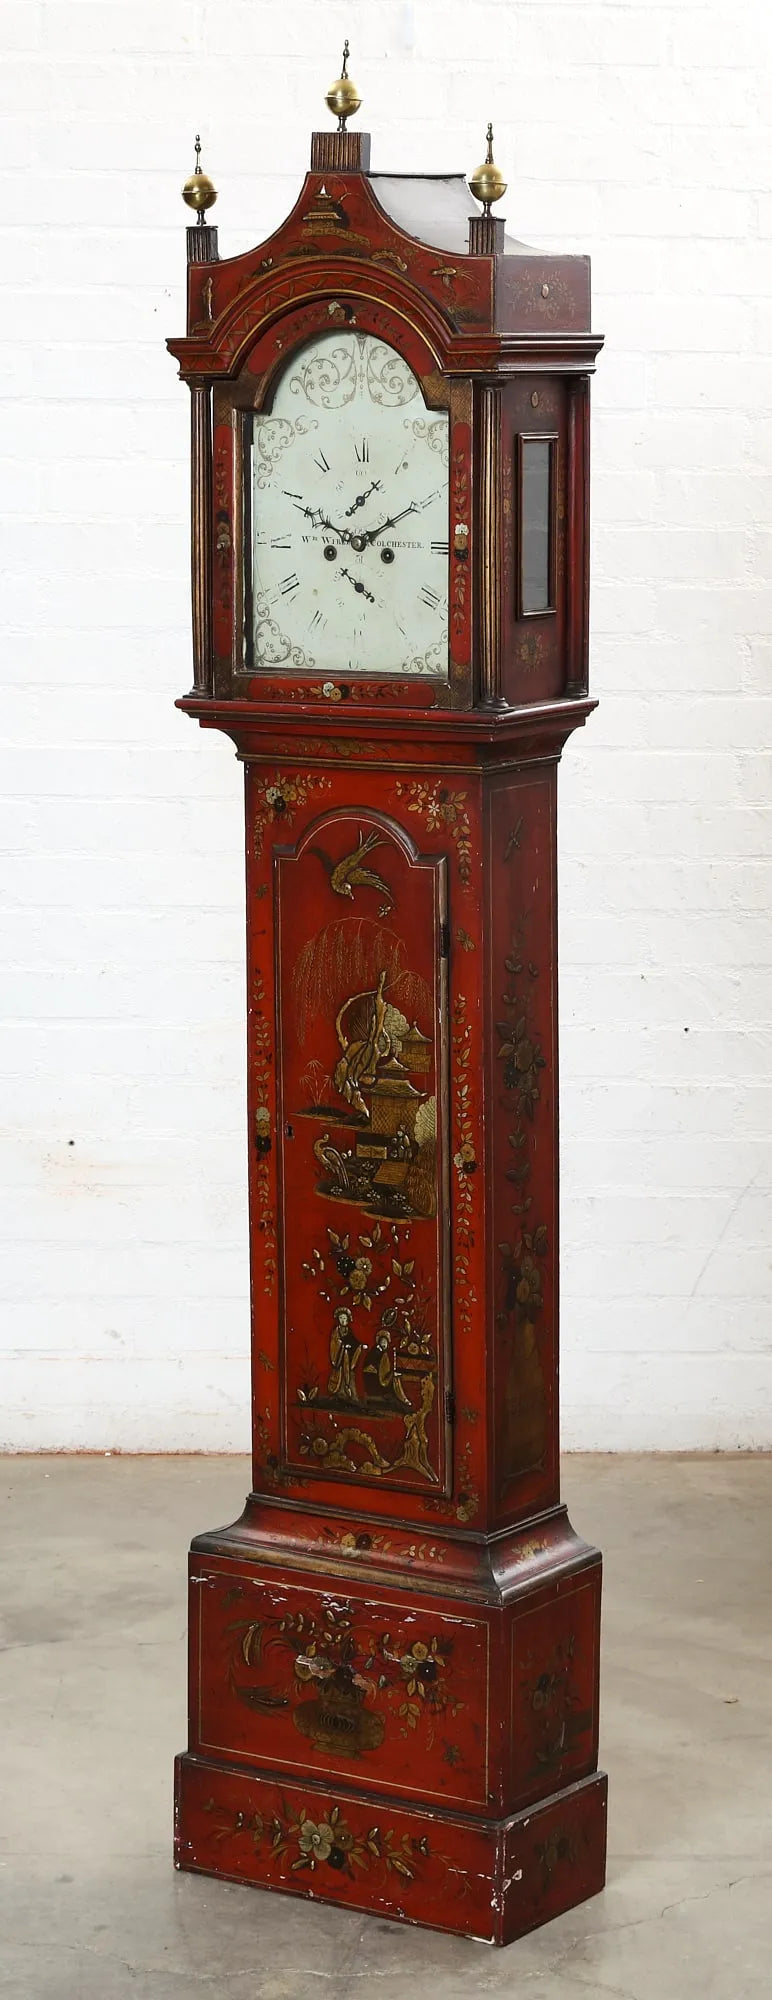 TK1-040: Early 19th Century English George II Red & Gilt Japanned Tall Case Clock - William Wire, Colchester